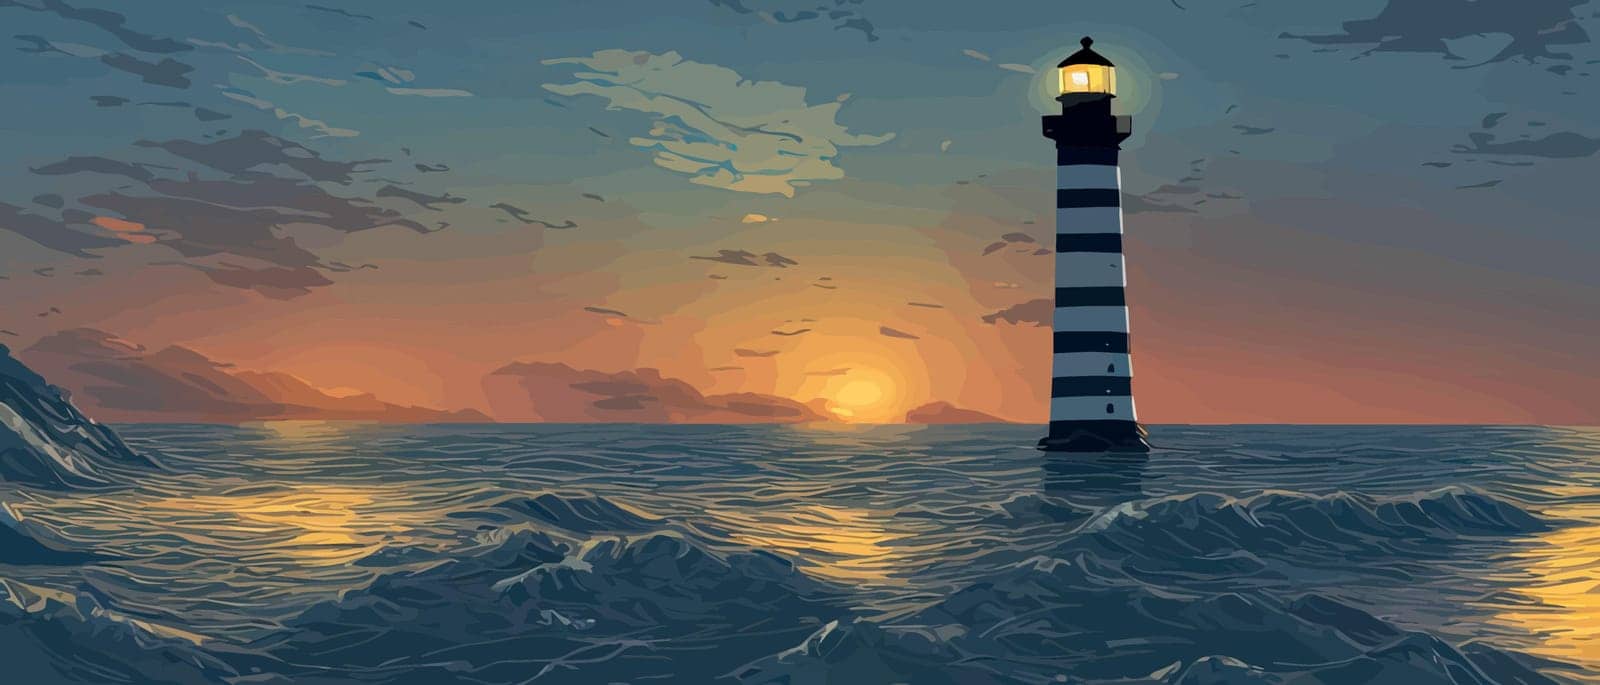 Tower is red and white lighthouse decorated with sea view with mountains as a backdrop at sunset with clouds, waves in the ocean. Design from art, paper and digital crafts. Vector illustration